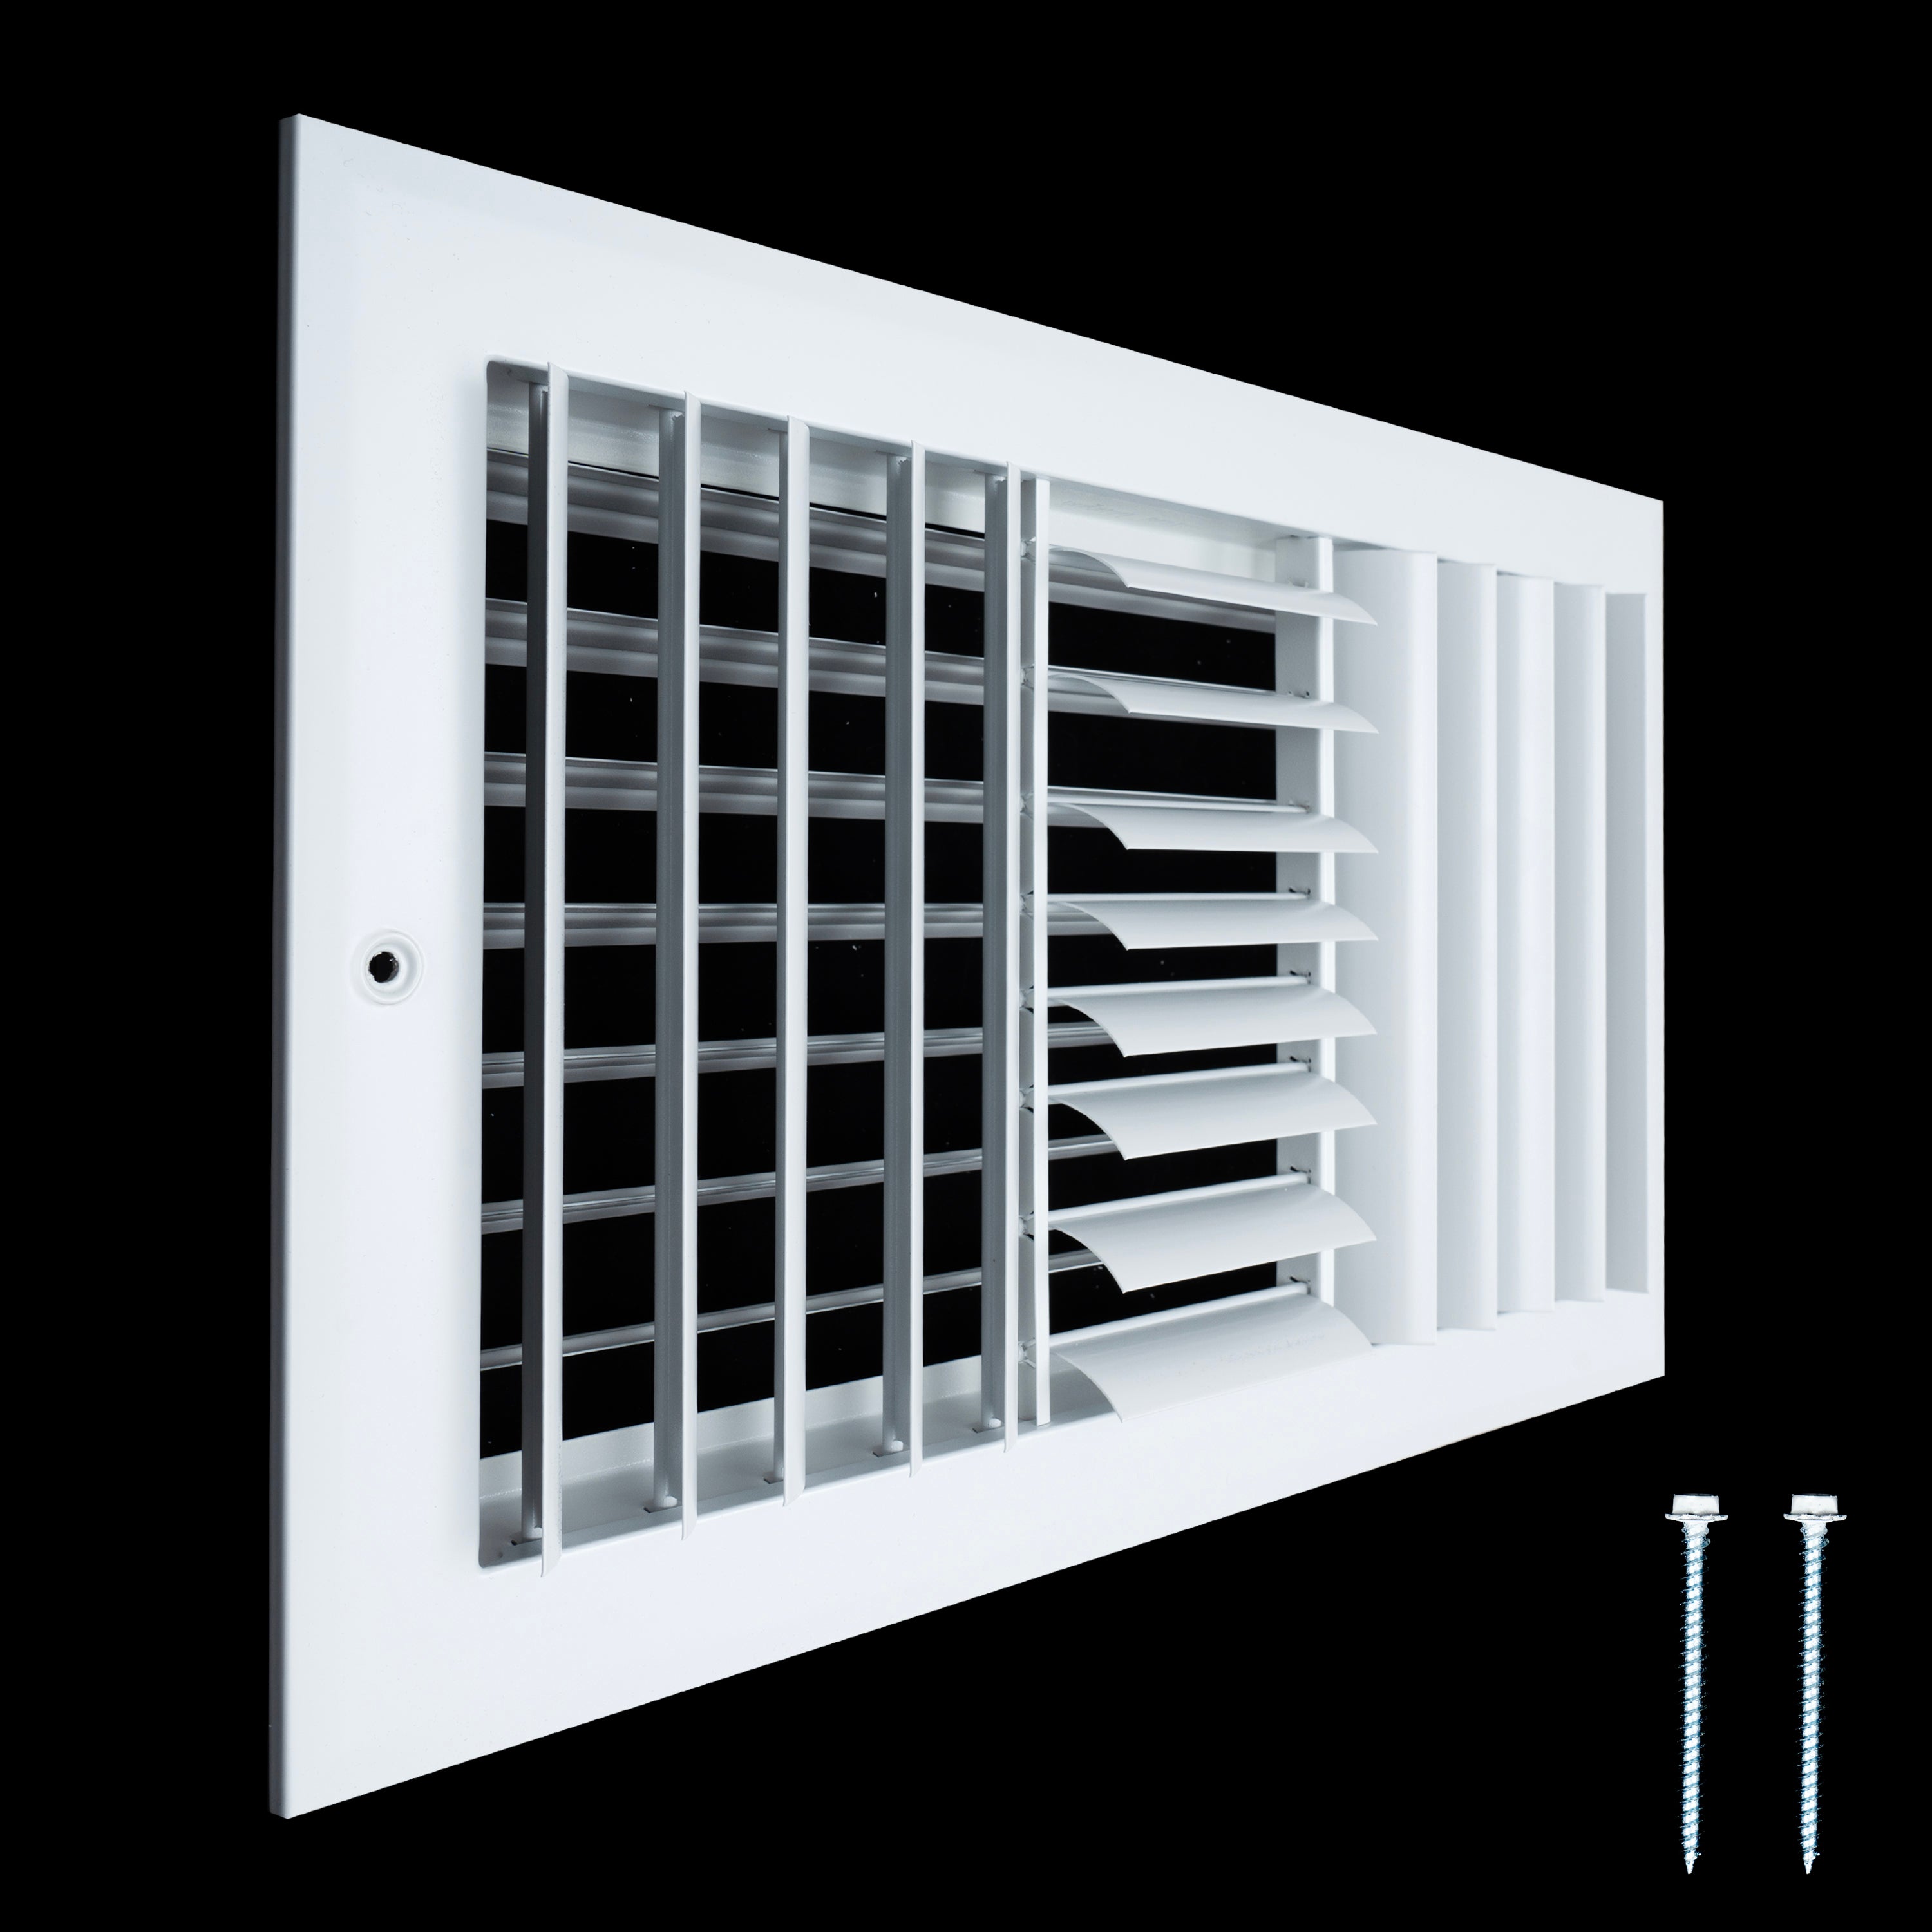 14"W x 8"H [Duct Opening] Aluminum 3-WAY Adjustable Air Supply Grille | Register Vent Cover Grill for Sidewall and Ceiling | White | Outer Dimensions: 15.75"W x 9.75"